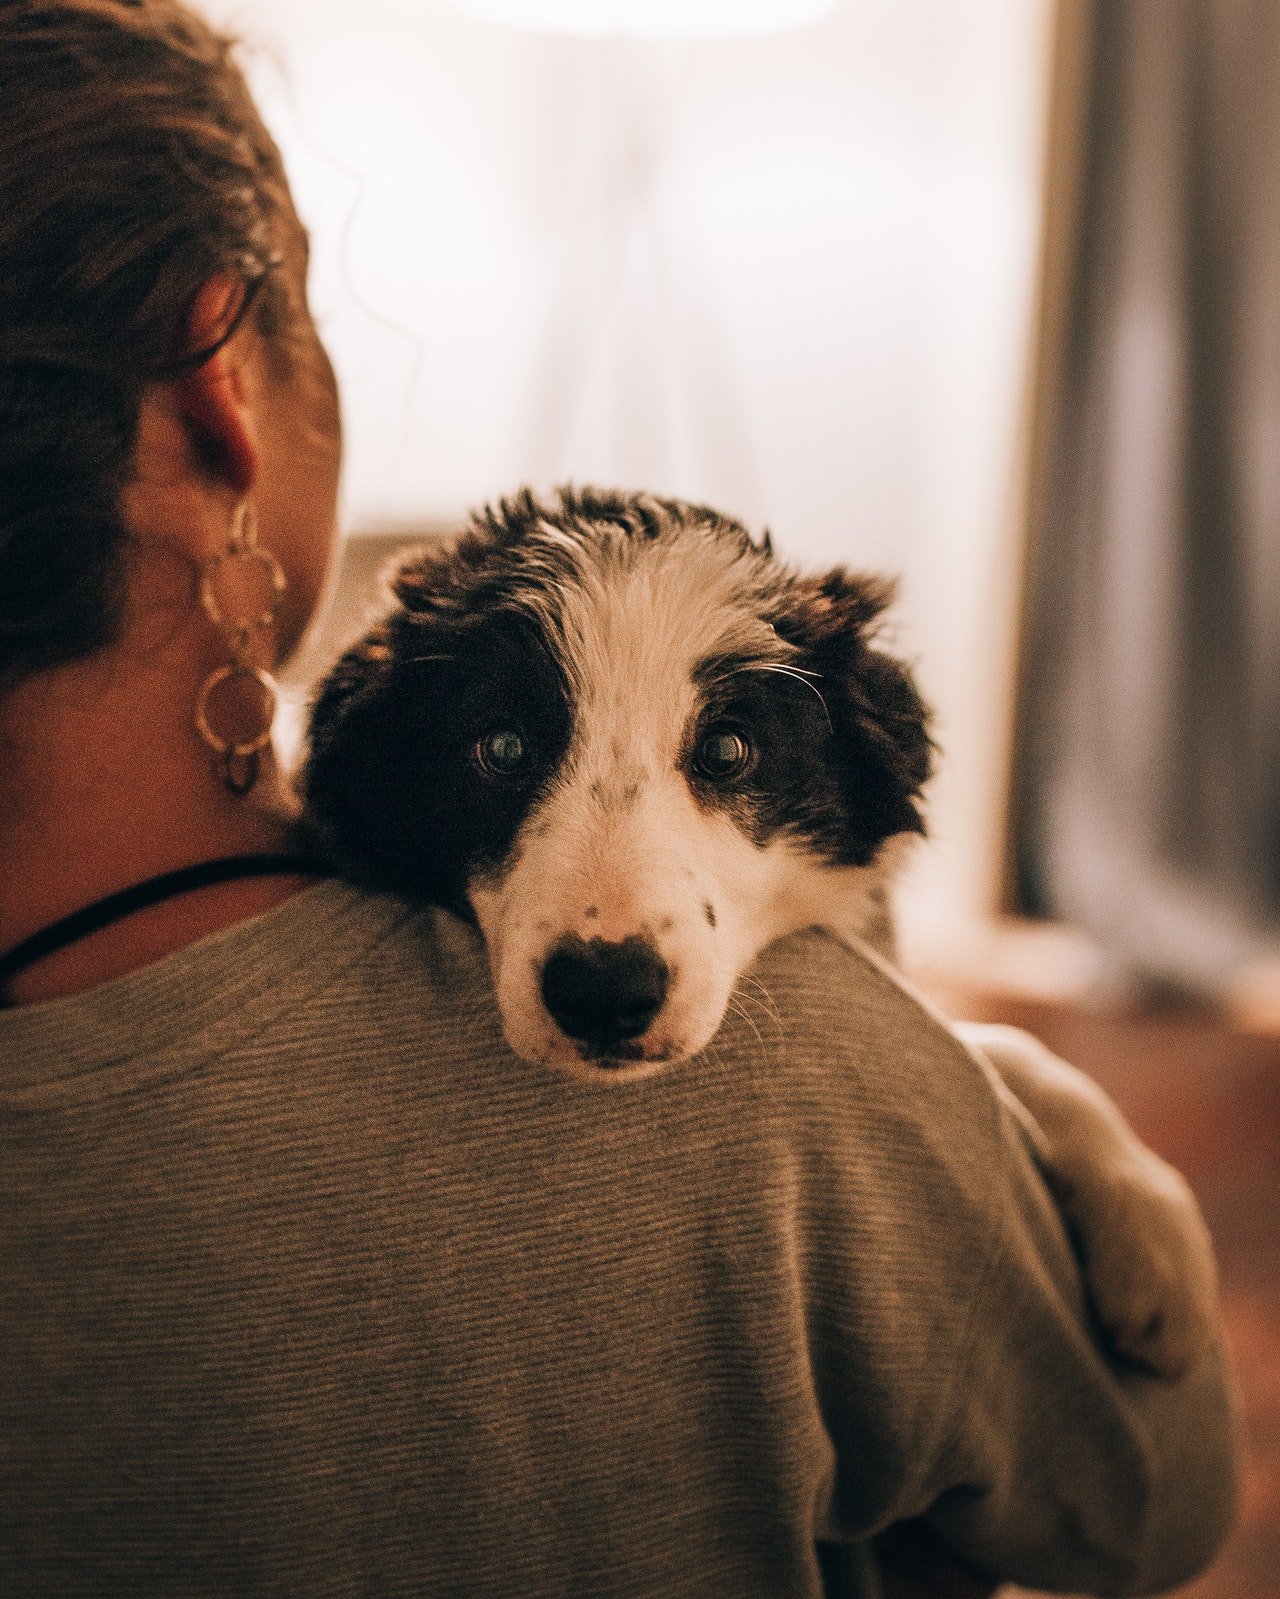 Photo of a woman carrying a dog | Photo: Pexels